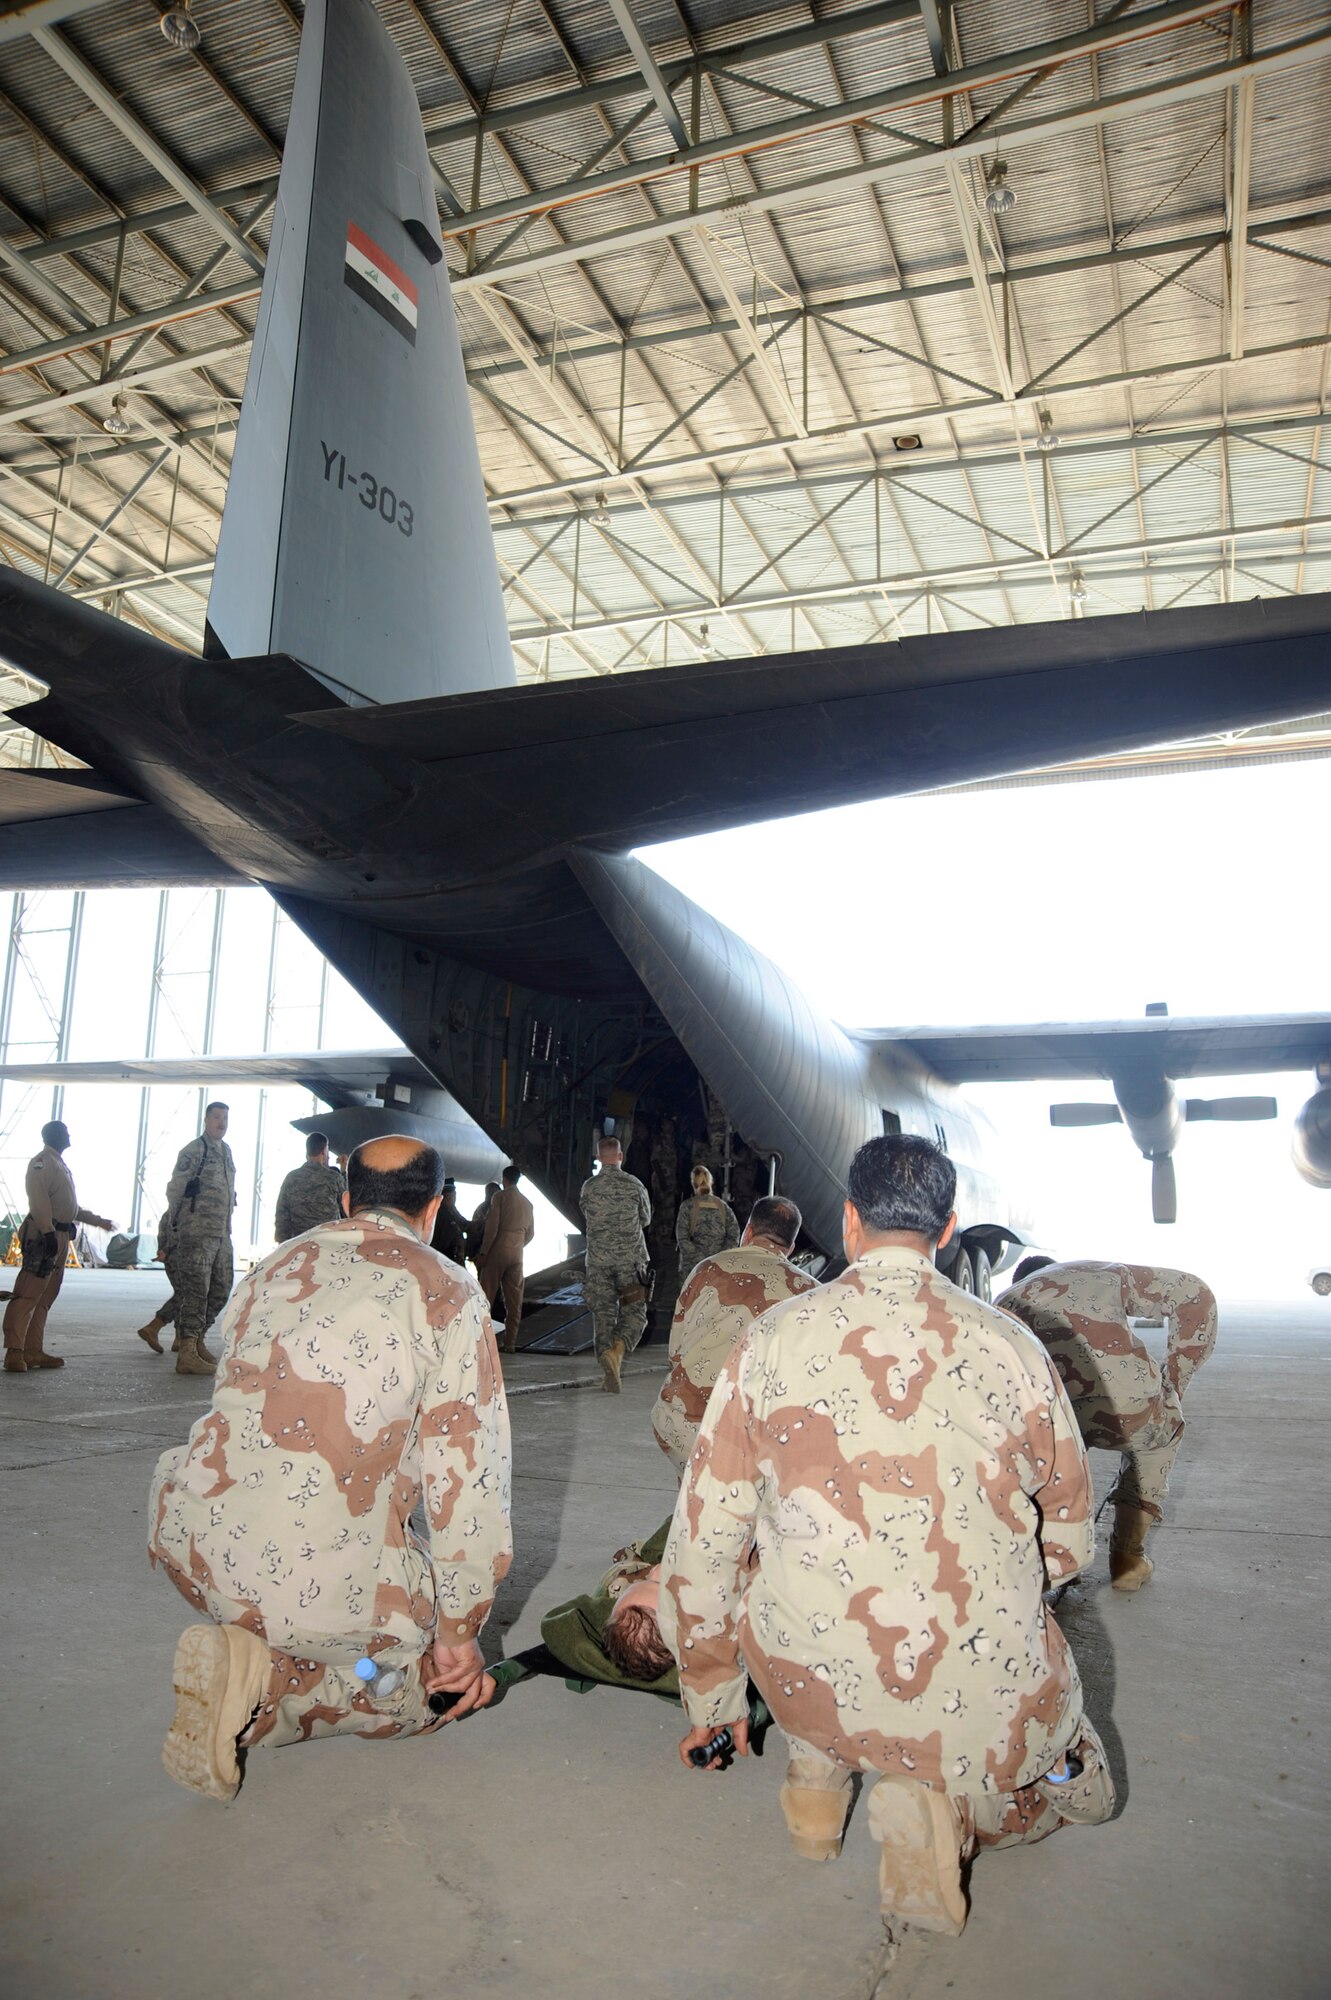 Iraqi air force medics prepare to load a mock patient into a C130 Hercules aircraft for a demonstration for Iraqi senior leadership during their graduation ceremony at New Al-Muthana Air Base, Iraq on Dec. 4, 2008. The Iraqi airmen completed a 12 day aero-medical evacuation basics course that covered reconfiguring a cargo aircraft into a medical patient aircraft, creating a load plan of patients and coordinating with ground support to load patients. (U.S. Air Force photo/Staff Sgt. Paul Villanueva II)